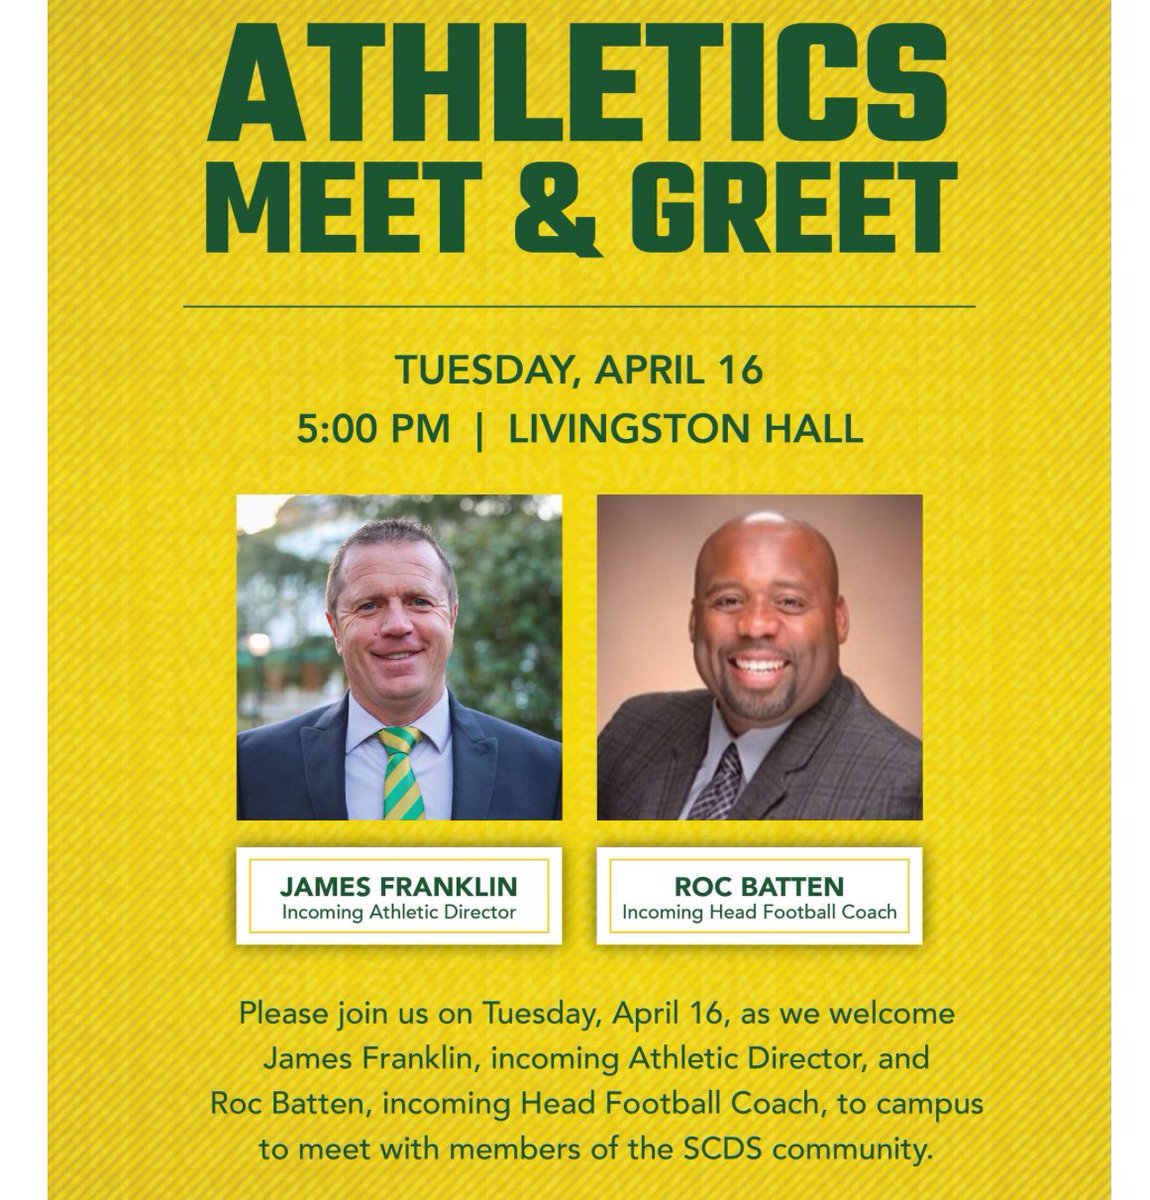 Stop over to Livingston Hall tomorrow and introduce yourself to our new AD and Head Football Coach! See you there! #HornetNation #SWARM